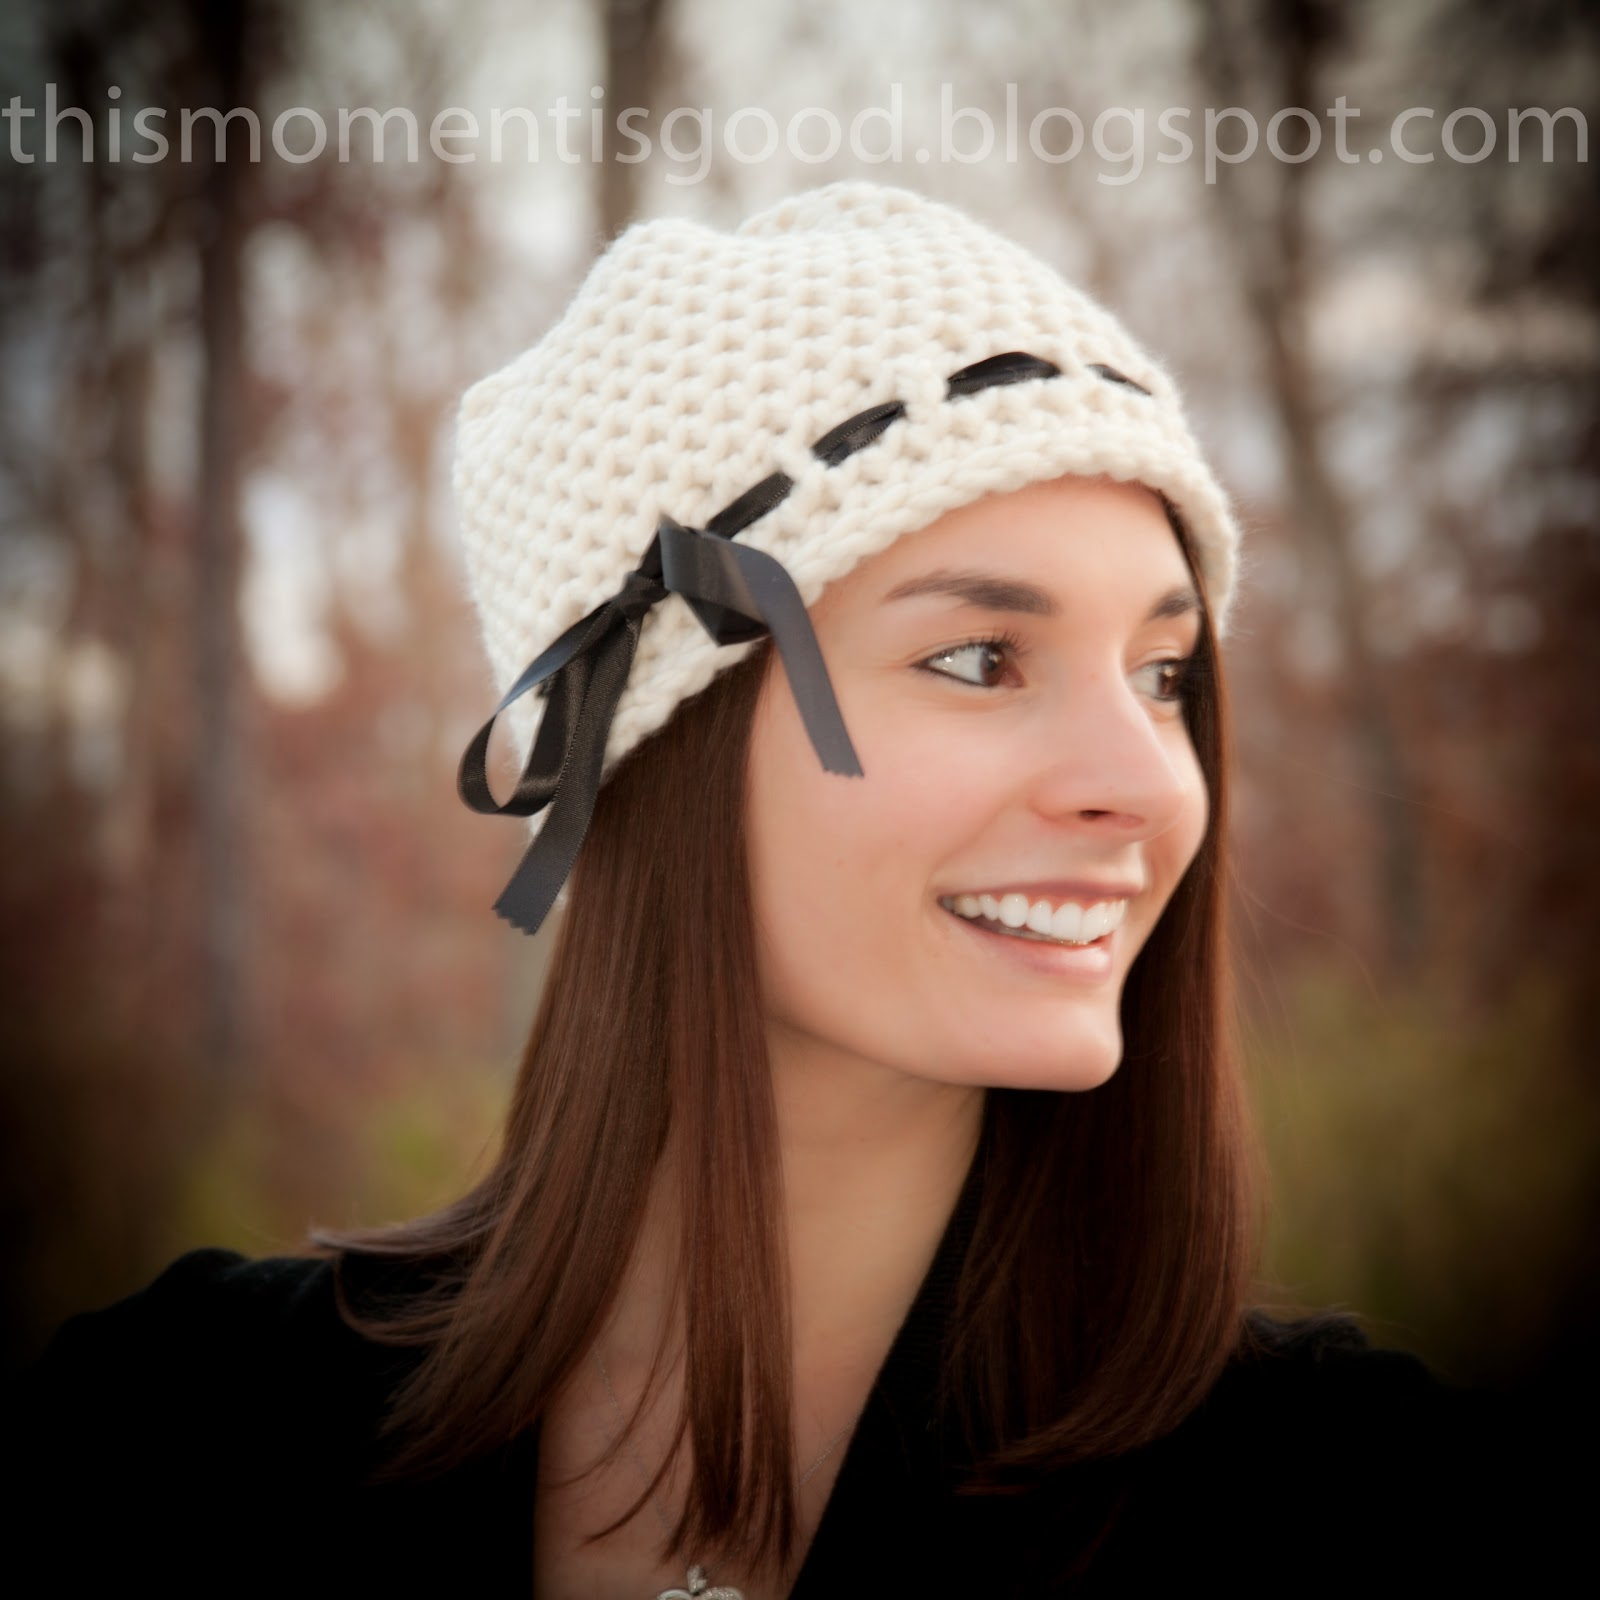 Ladies Knitted Hat Patterns Loom Knit Hat Patterns Loom Knitting This Moment Is Good